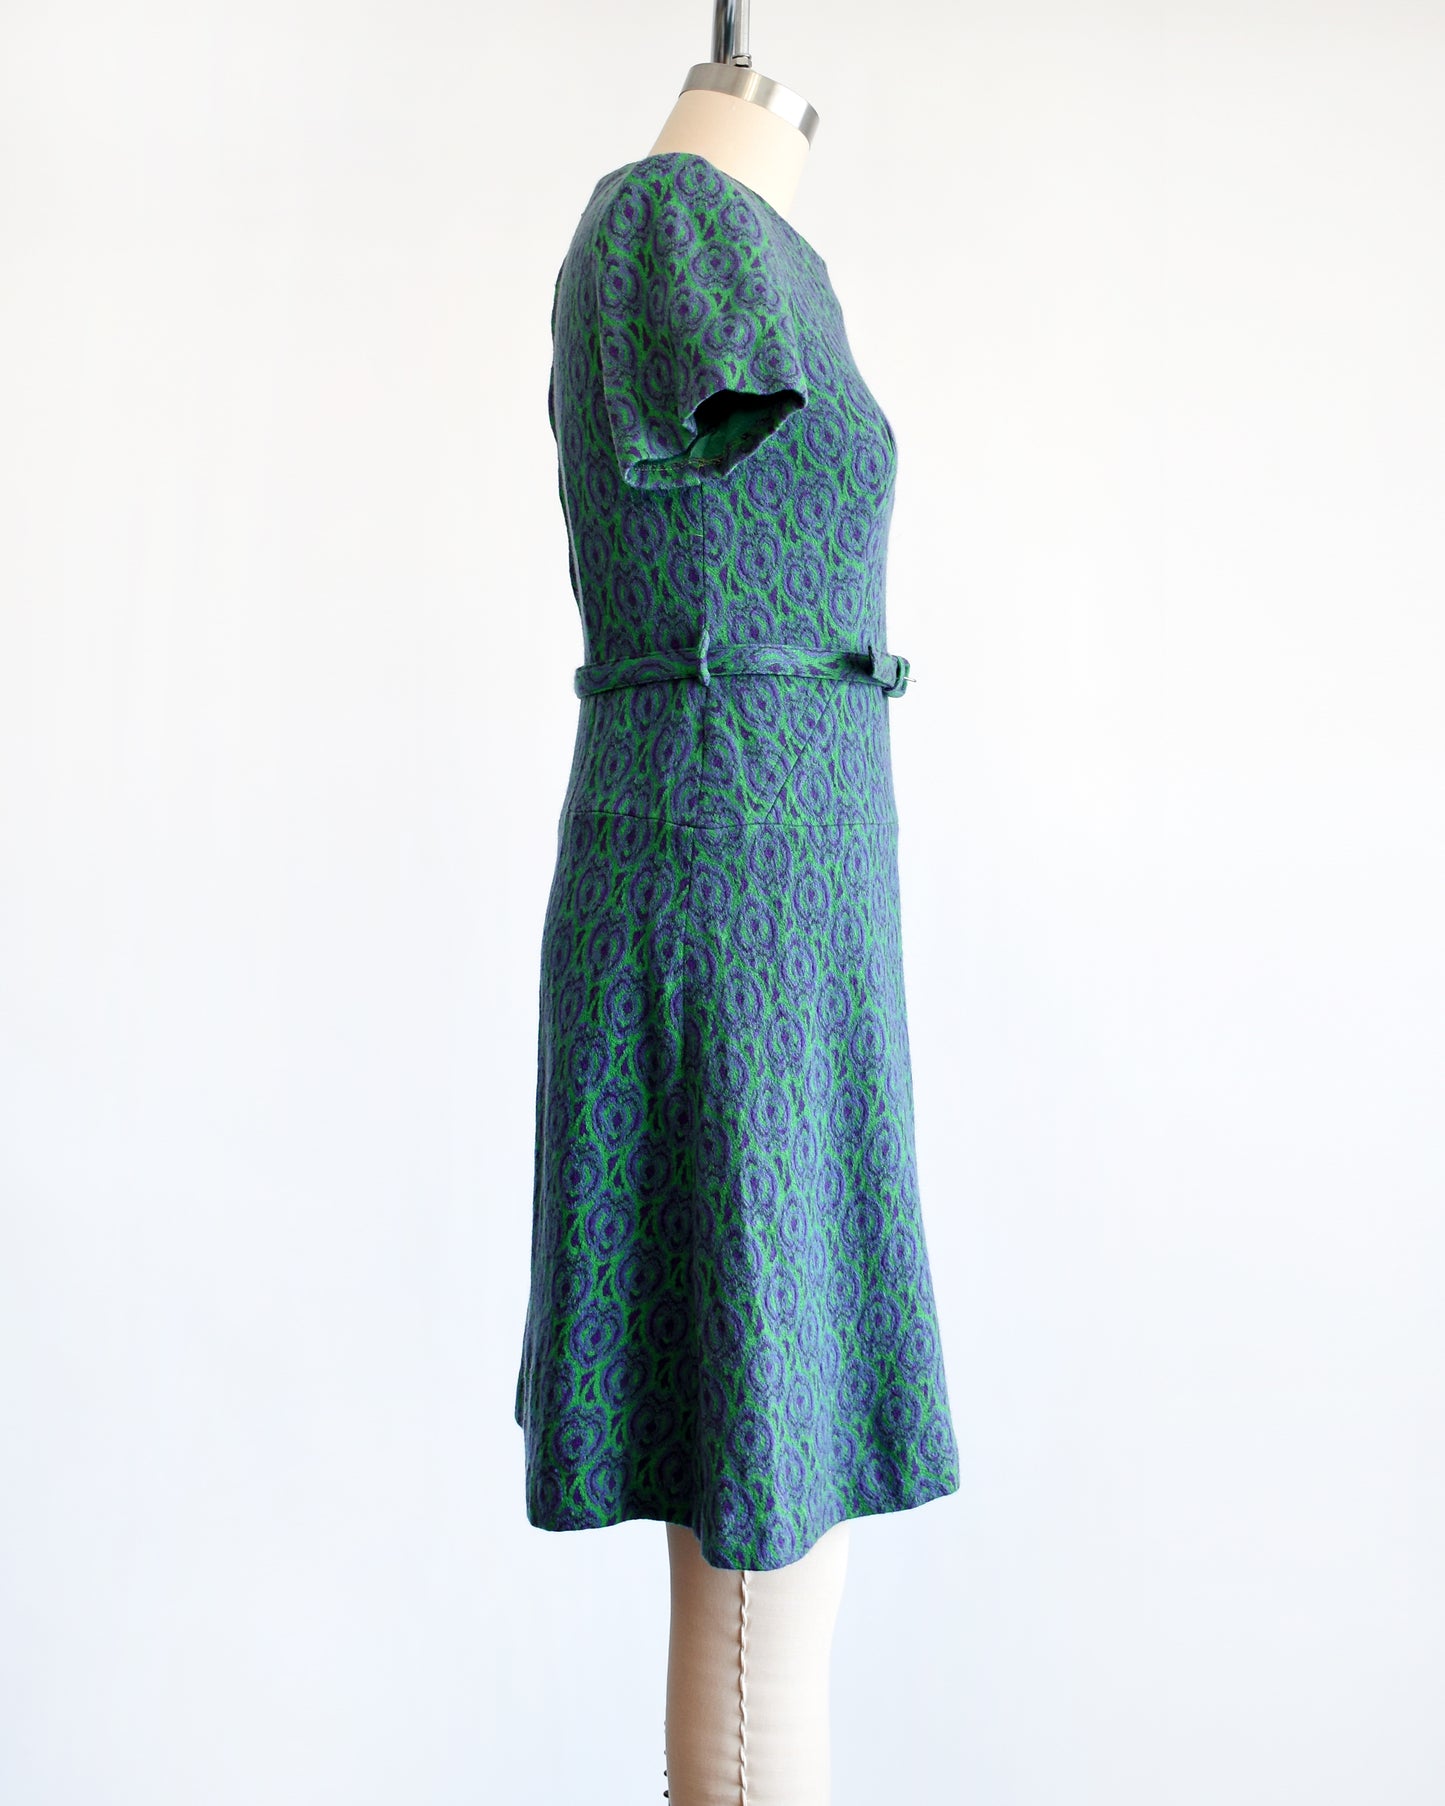 side view of a vintage 1960s green and purple drop waist dress and matching belt